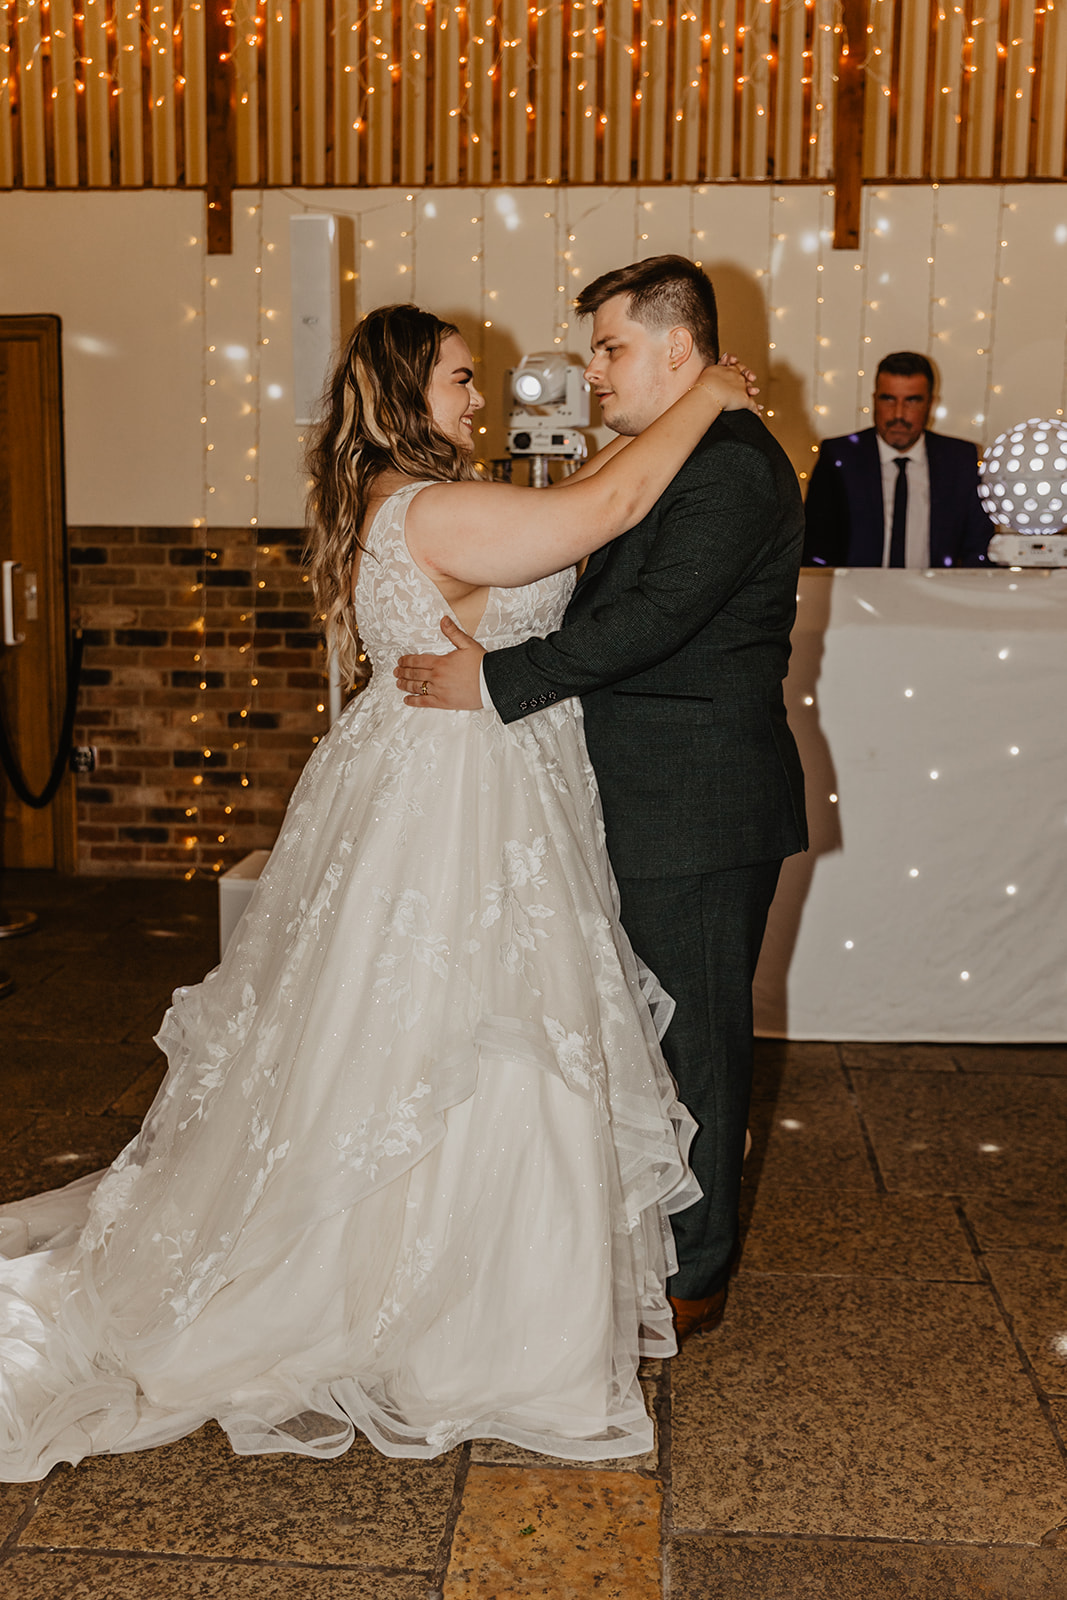 Bride and Groom have first dance at a Long Furlong Barn Wedding in Worthing, Sussex. By Olive Joy Photography.